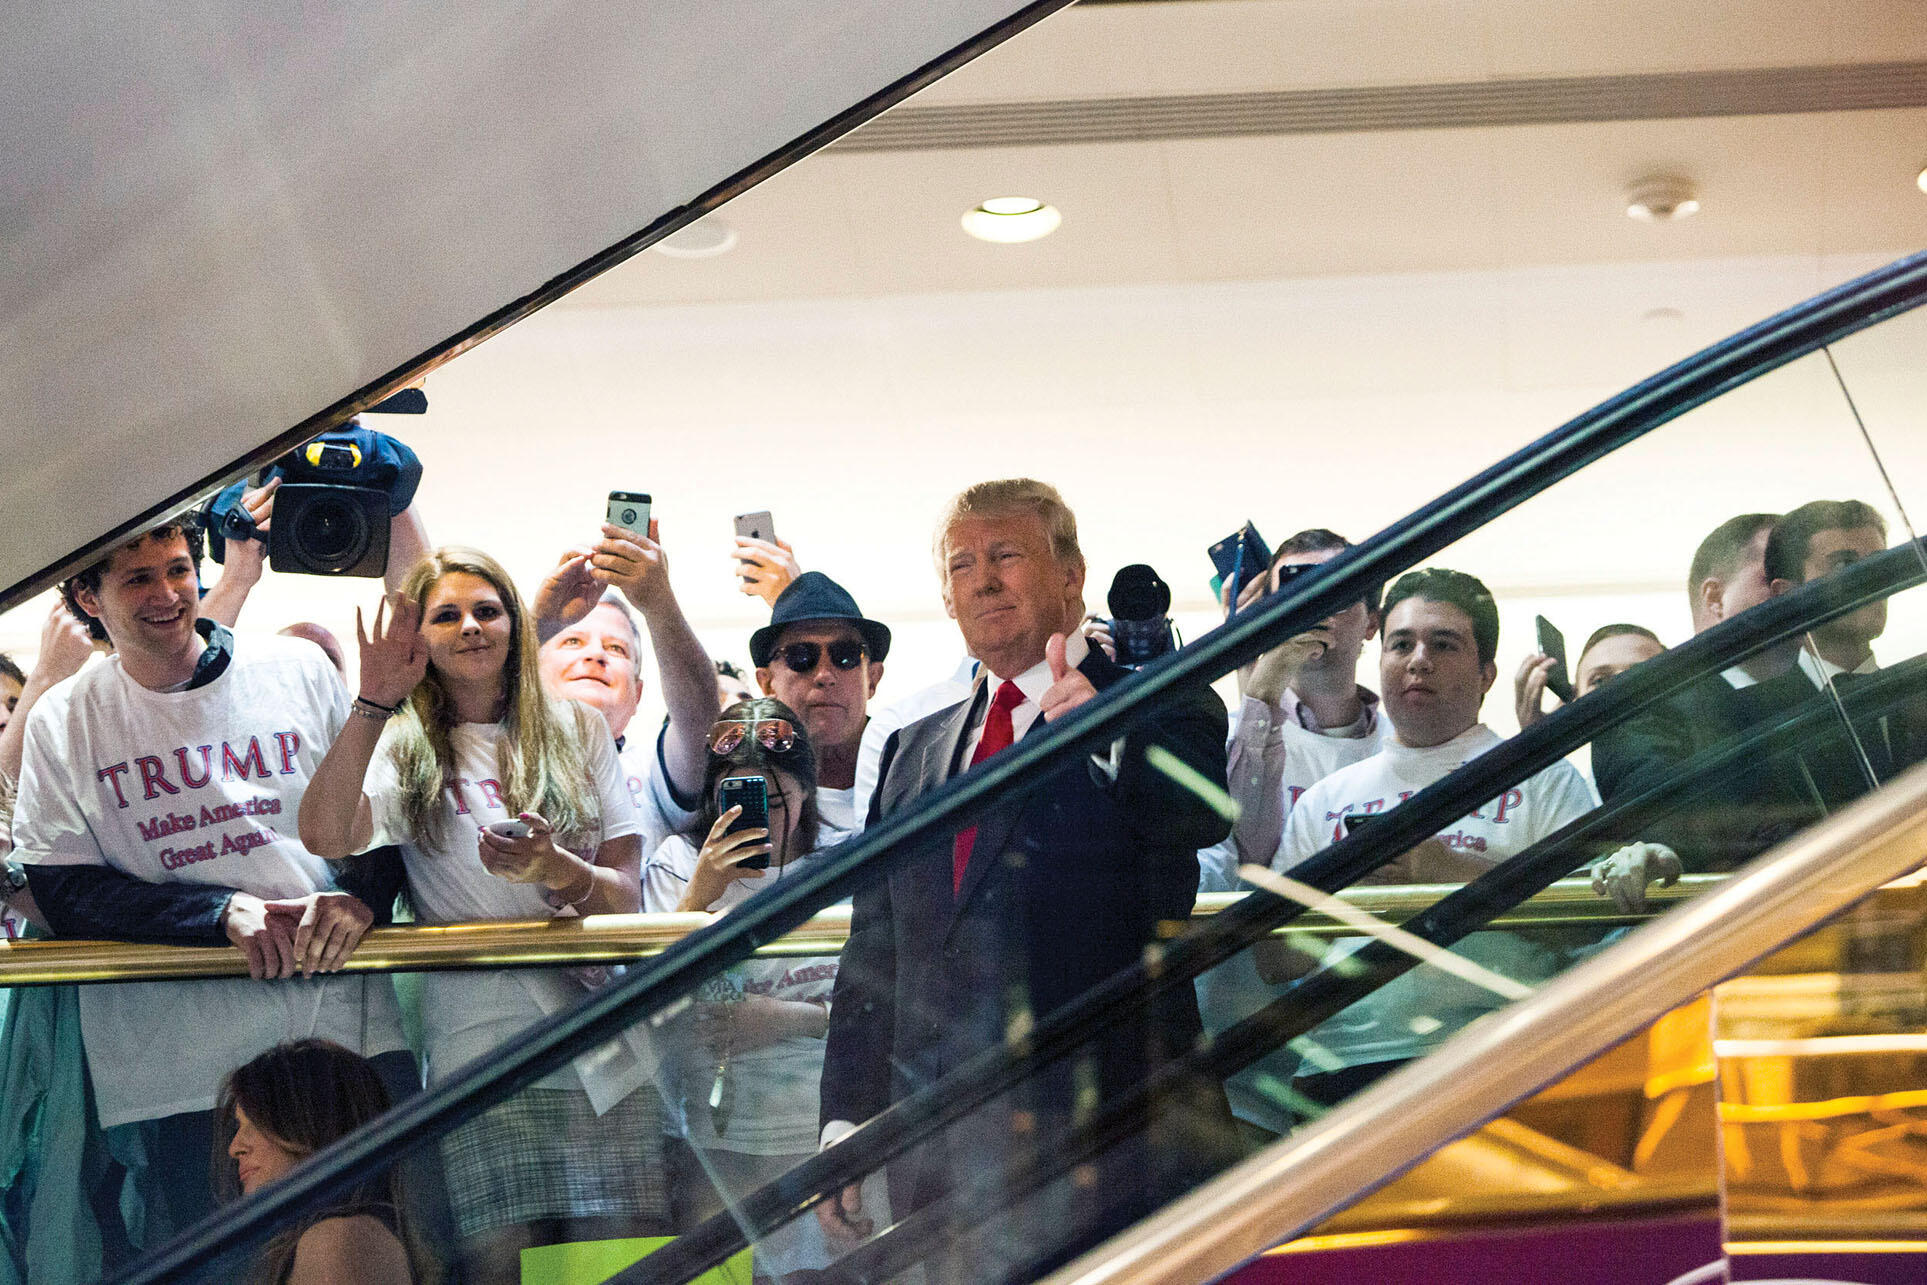 Donald Trump descends an escalator in Trump Tower to announce his candidacy for president, June 2015. (Photo by Tom Briglia/Getty Images.)